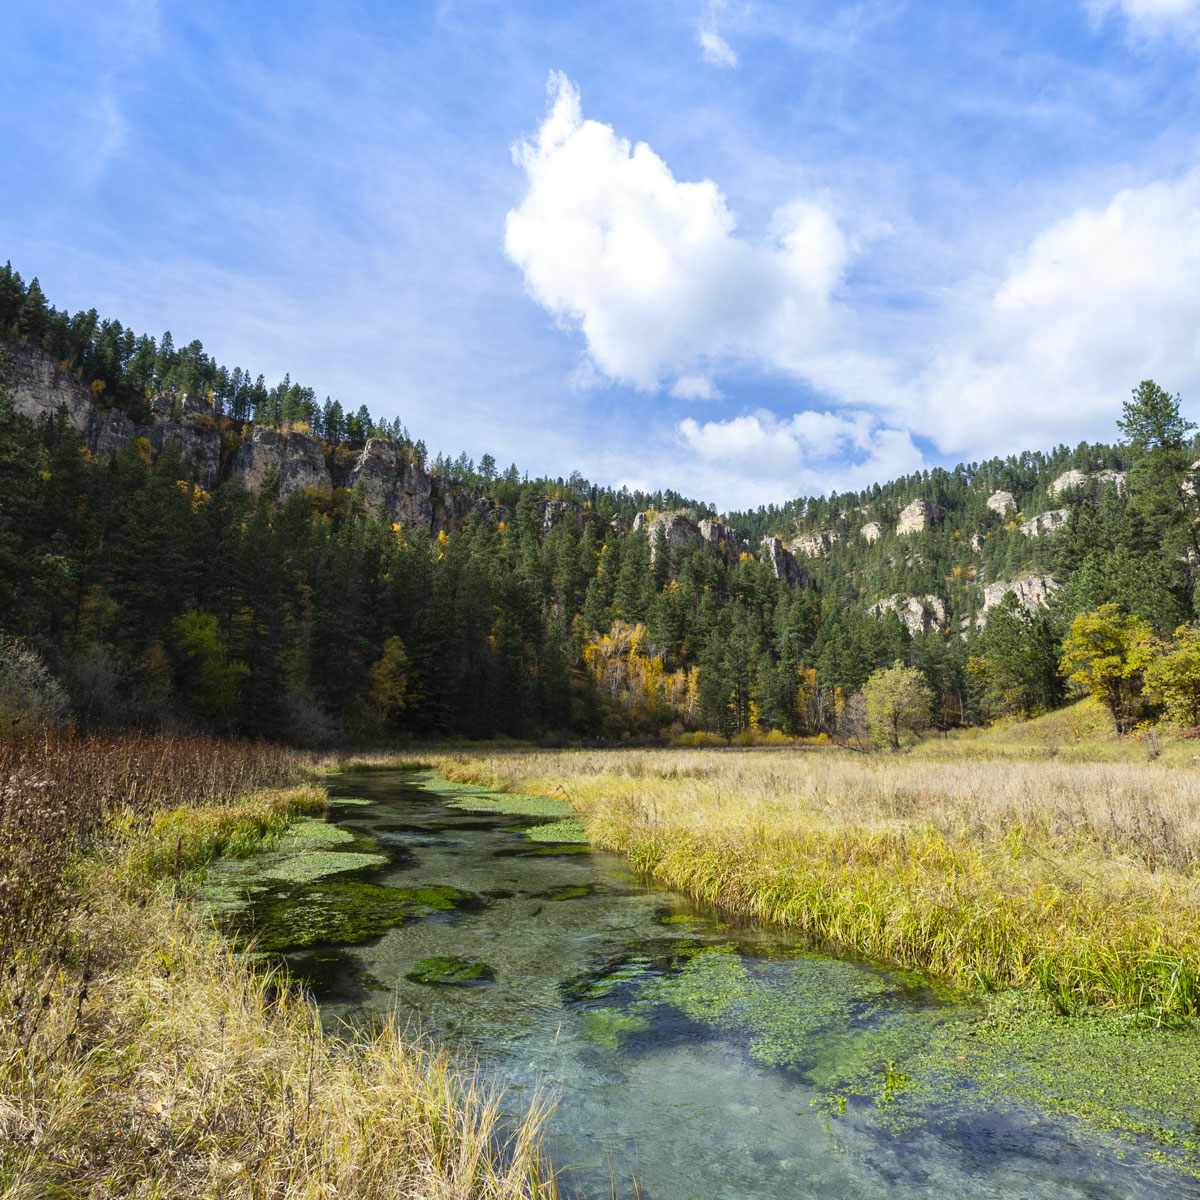 Crystal clear waters of Spearfish Creek meander through a meadow and the walls of Spearfish Canyon rise in the distance adorned in the greens and yellows of woodland under a blue cloud filled Autumn sky.